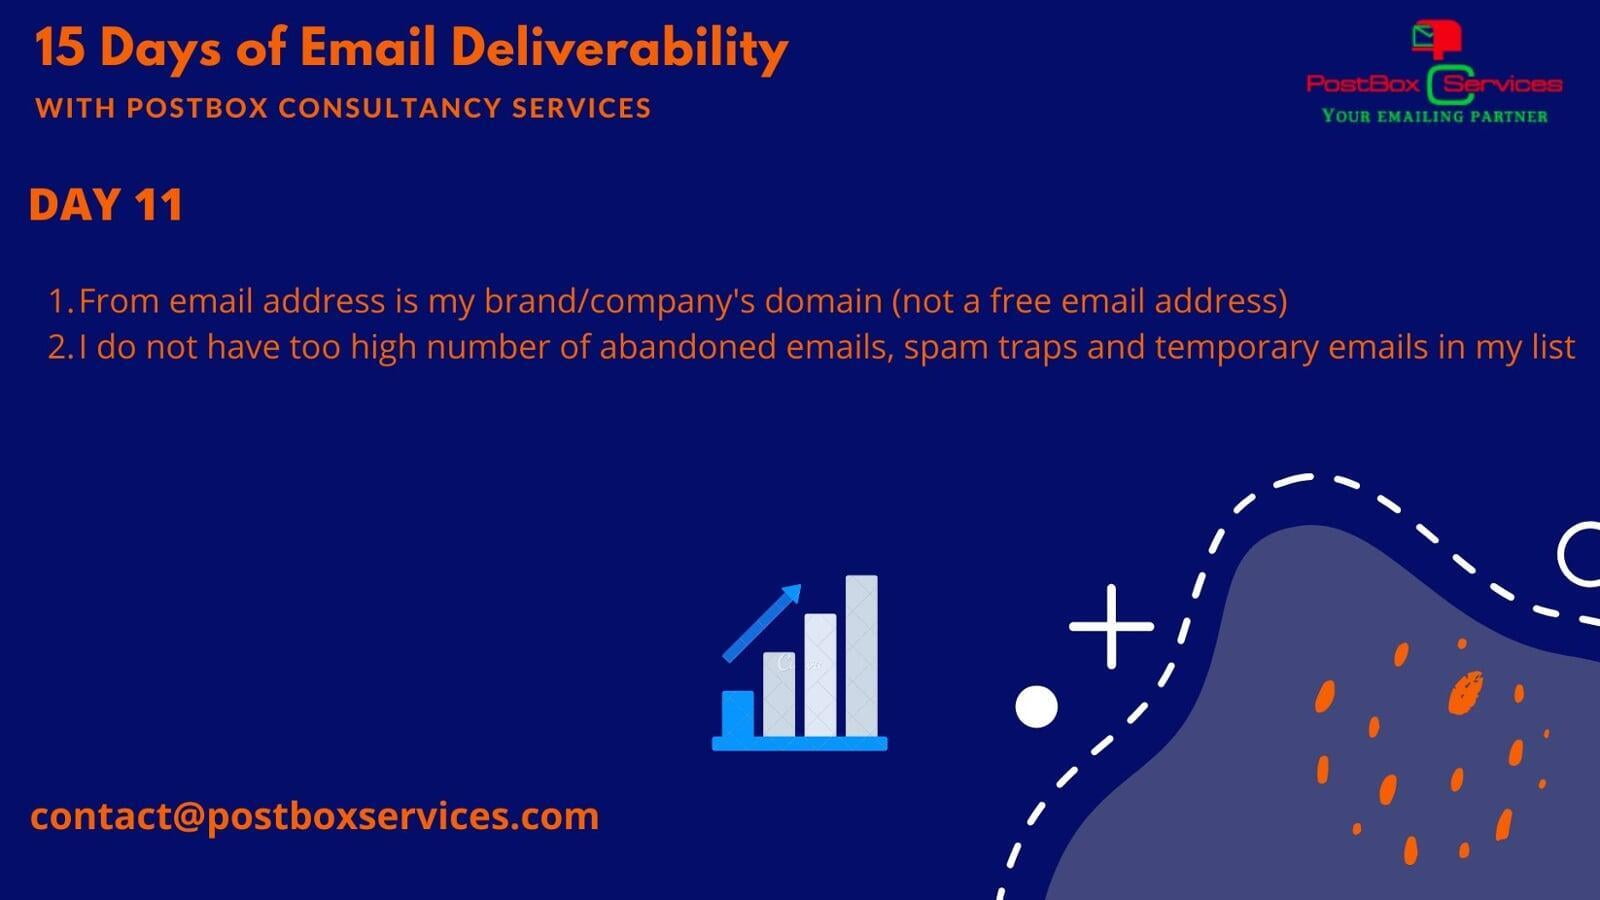 Day 11 Email Deliverability